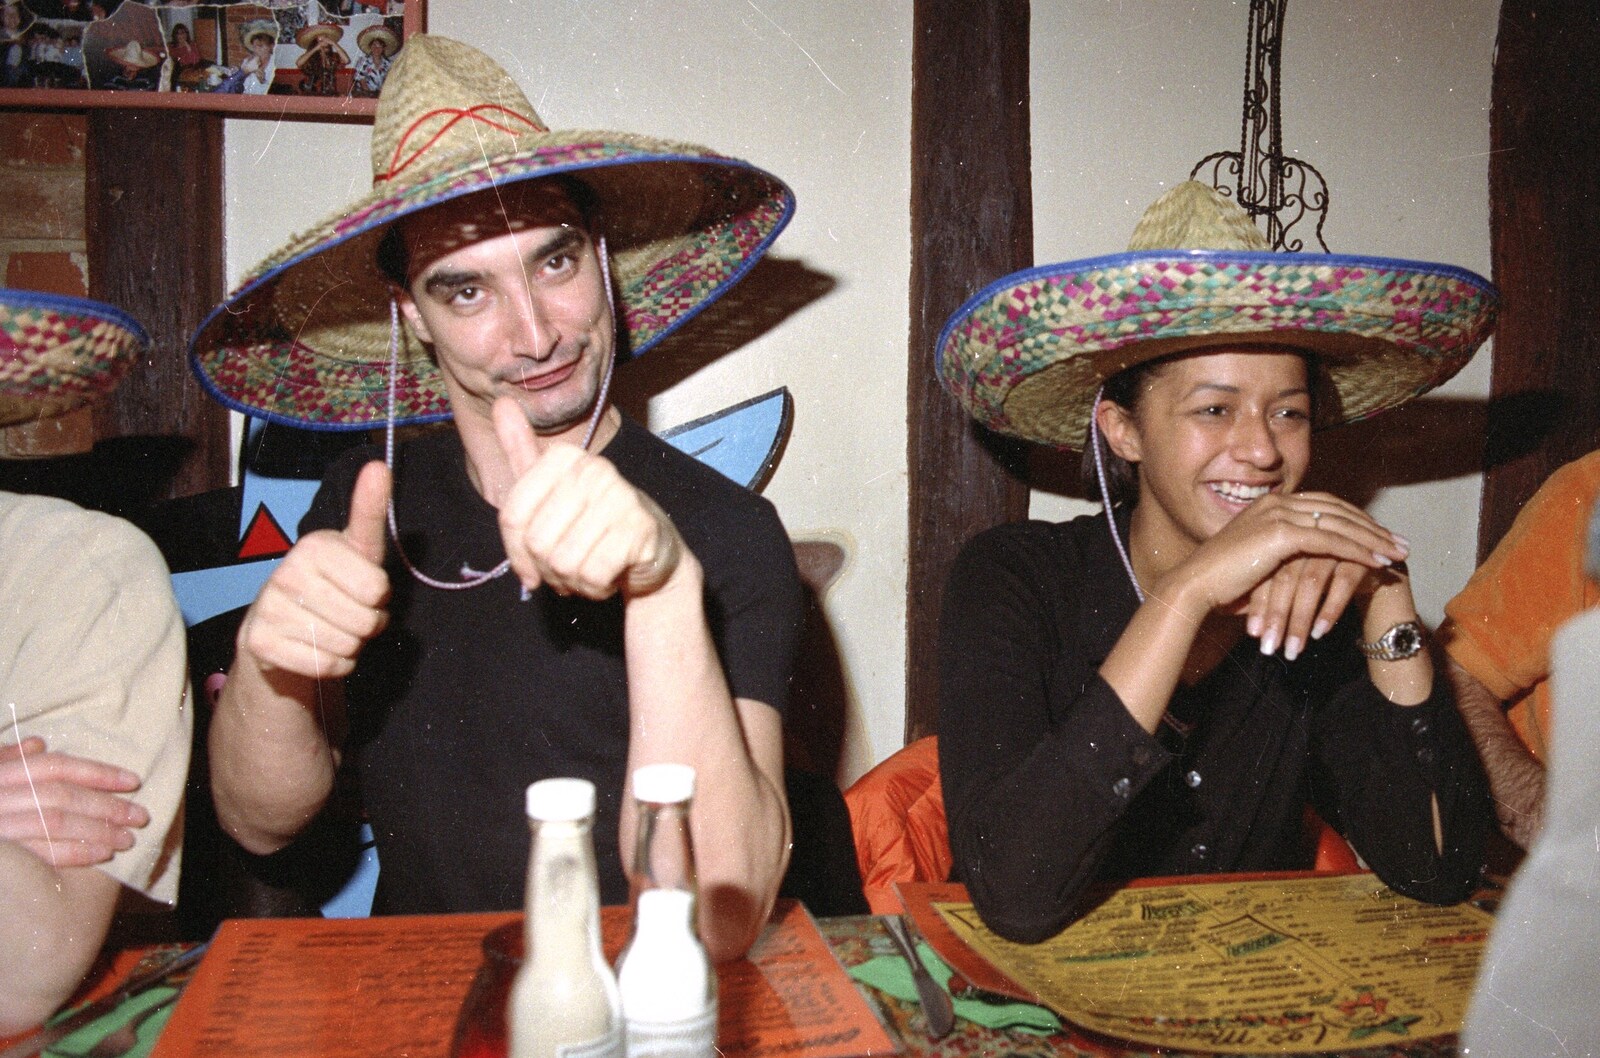 A CISU Night at Los Mexicanos Restaurant, Ipswich - 15th December 1996: Orhan gives a thumbs up, as Natalie has a laff